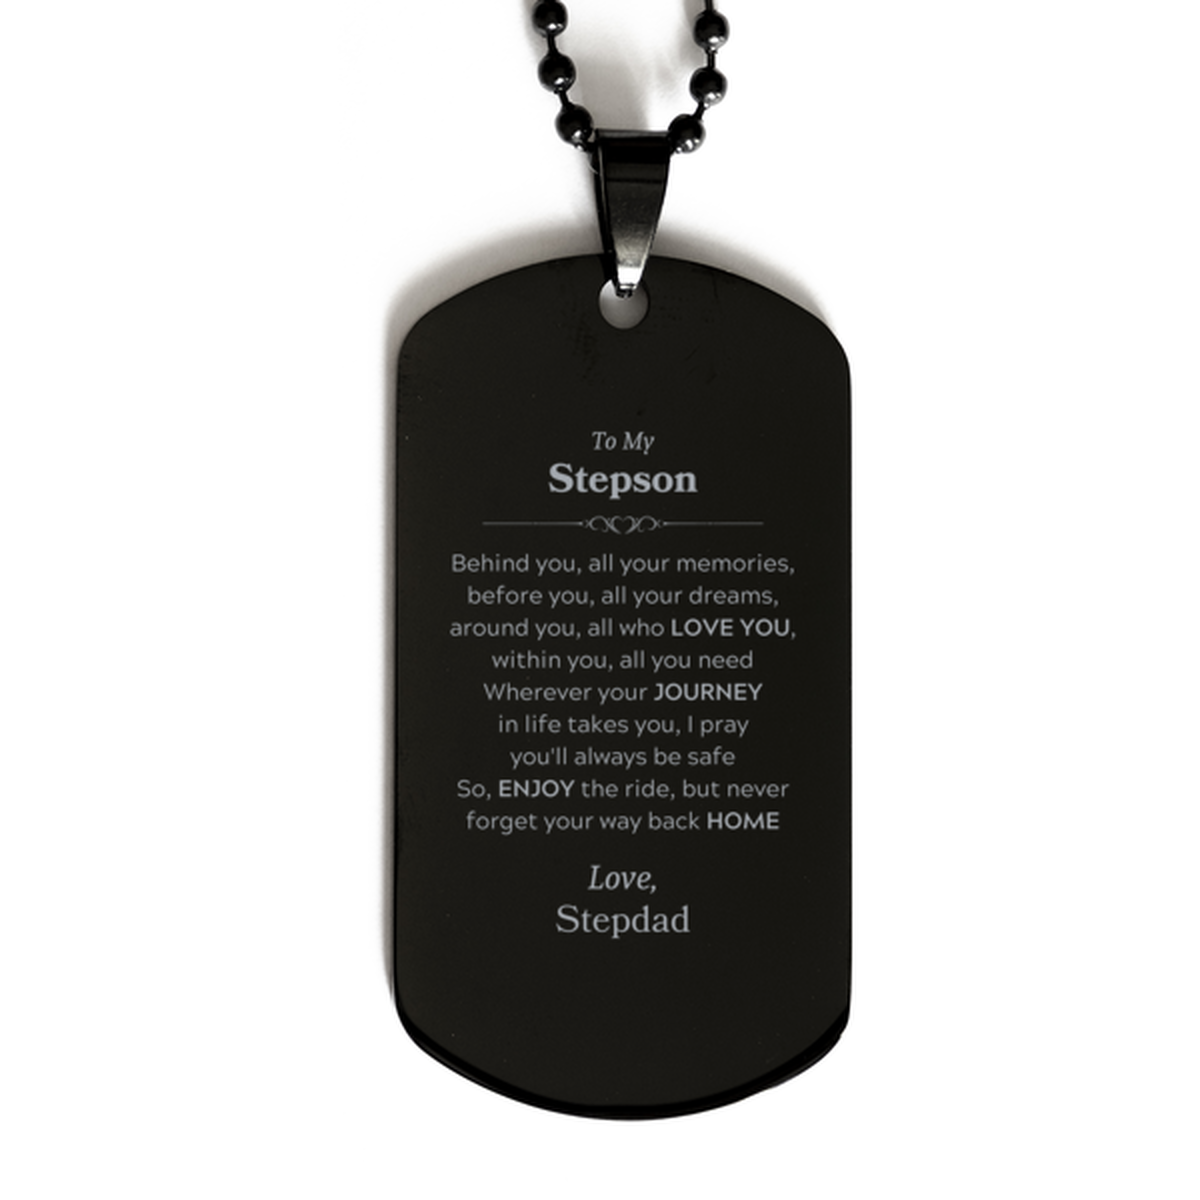 To My Stepson Graduation Gifts from Stepdad, Stepson Black Dog Tag Christmas Birthday Gifts for Stepson Behind you, all your memories, before you, all your dreams. Love, Stepdad